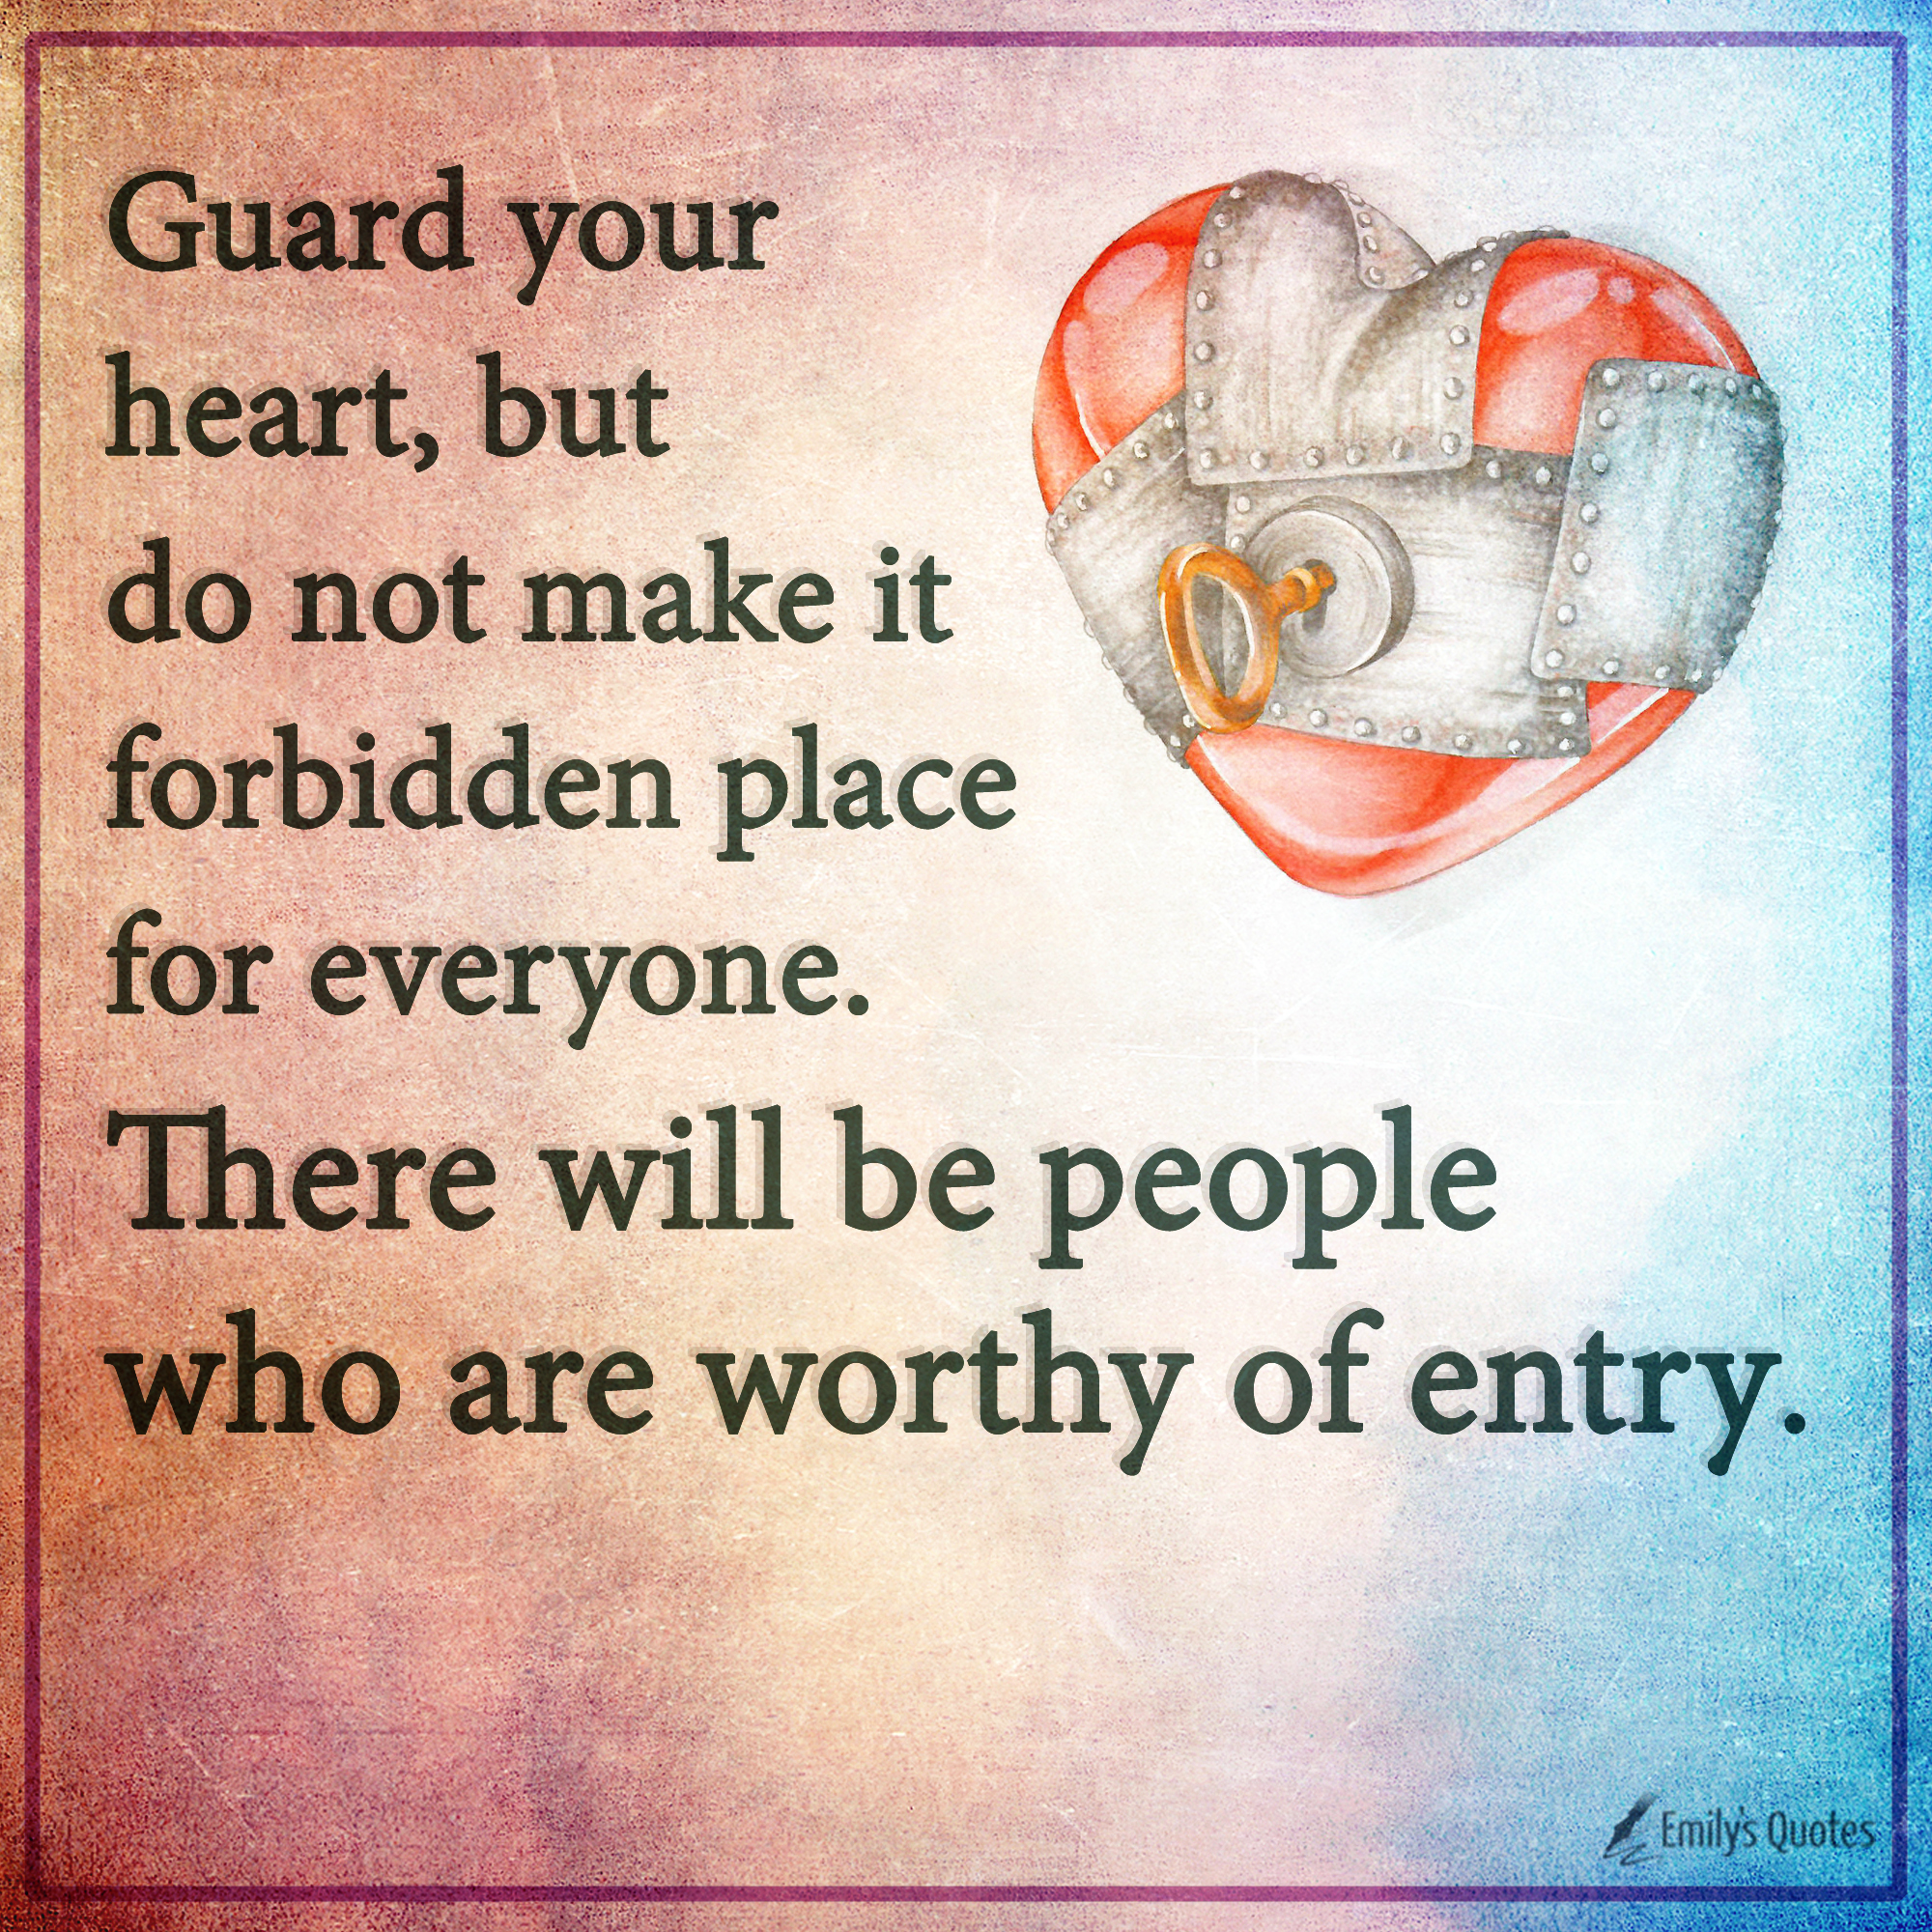 Guard your heart, but do not make it forbidden place for everyone. There